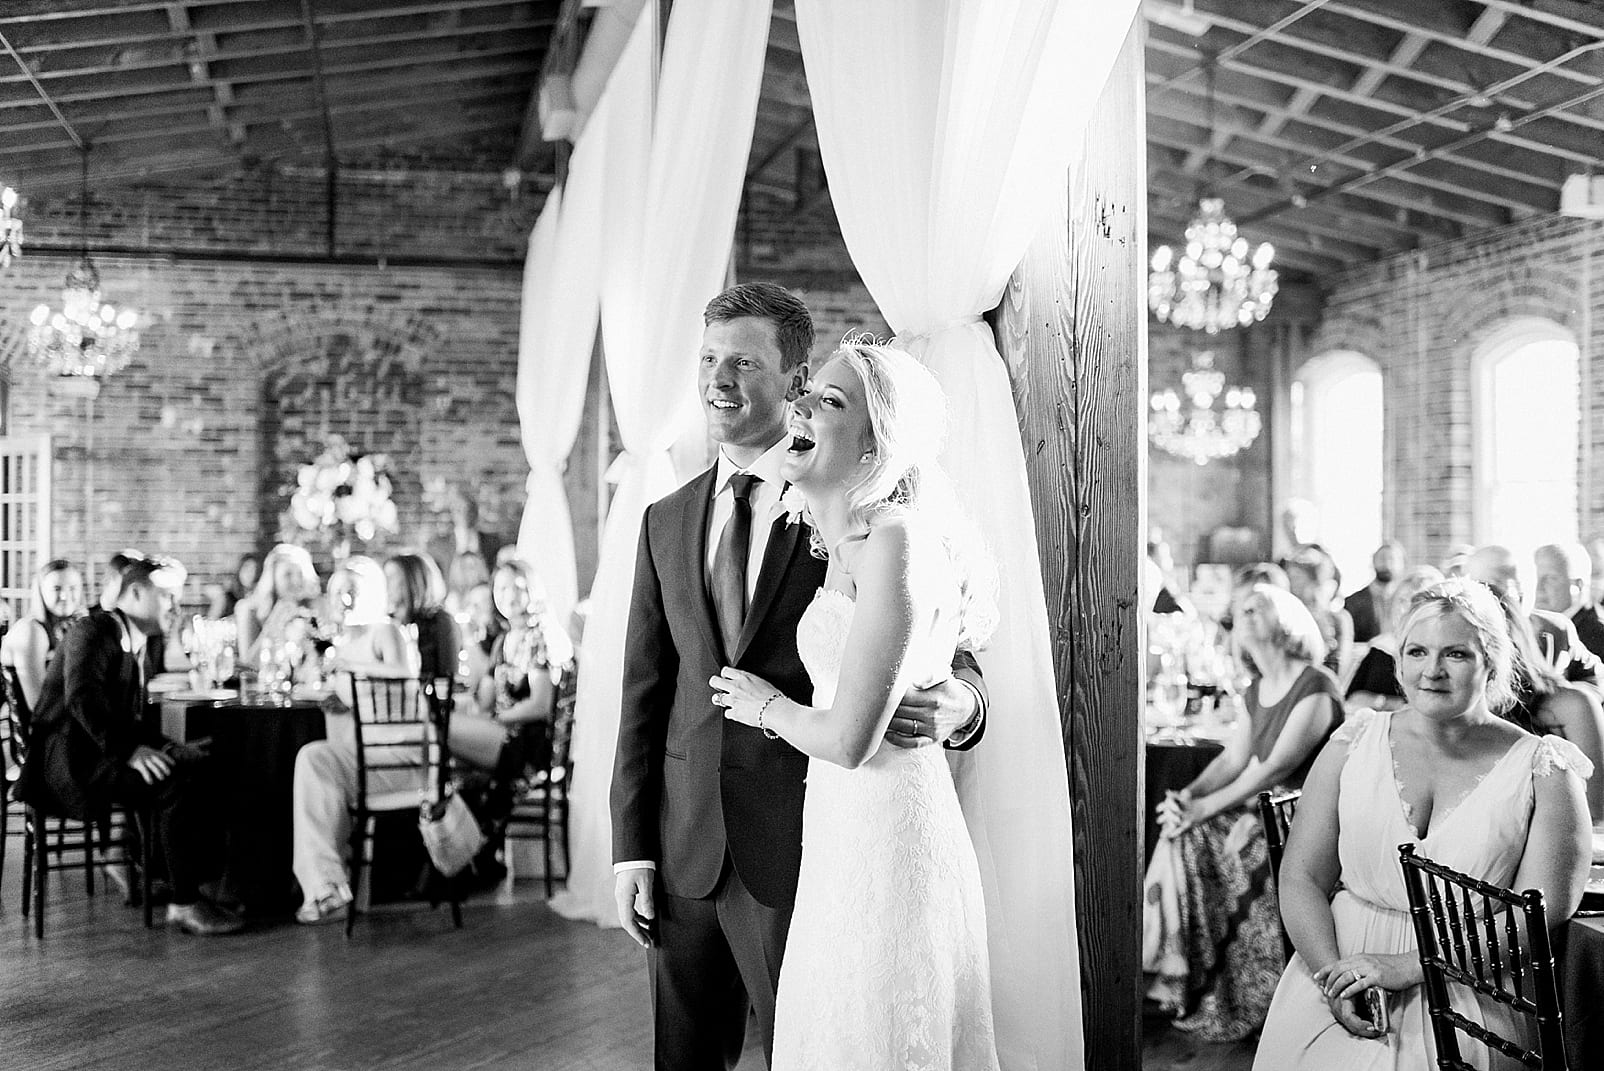 melrose knitting mill wedding reception photographer raleigh photographer bride and groom photo